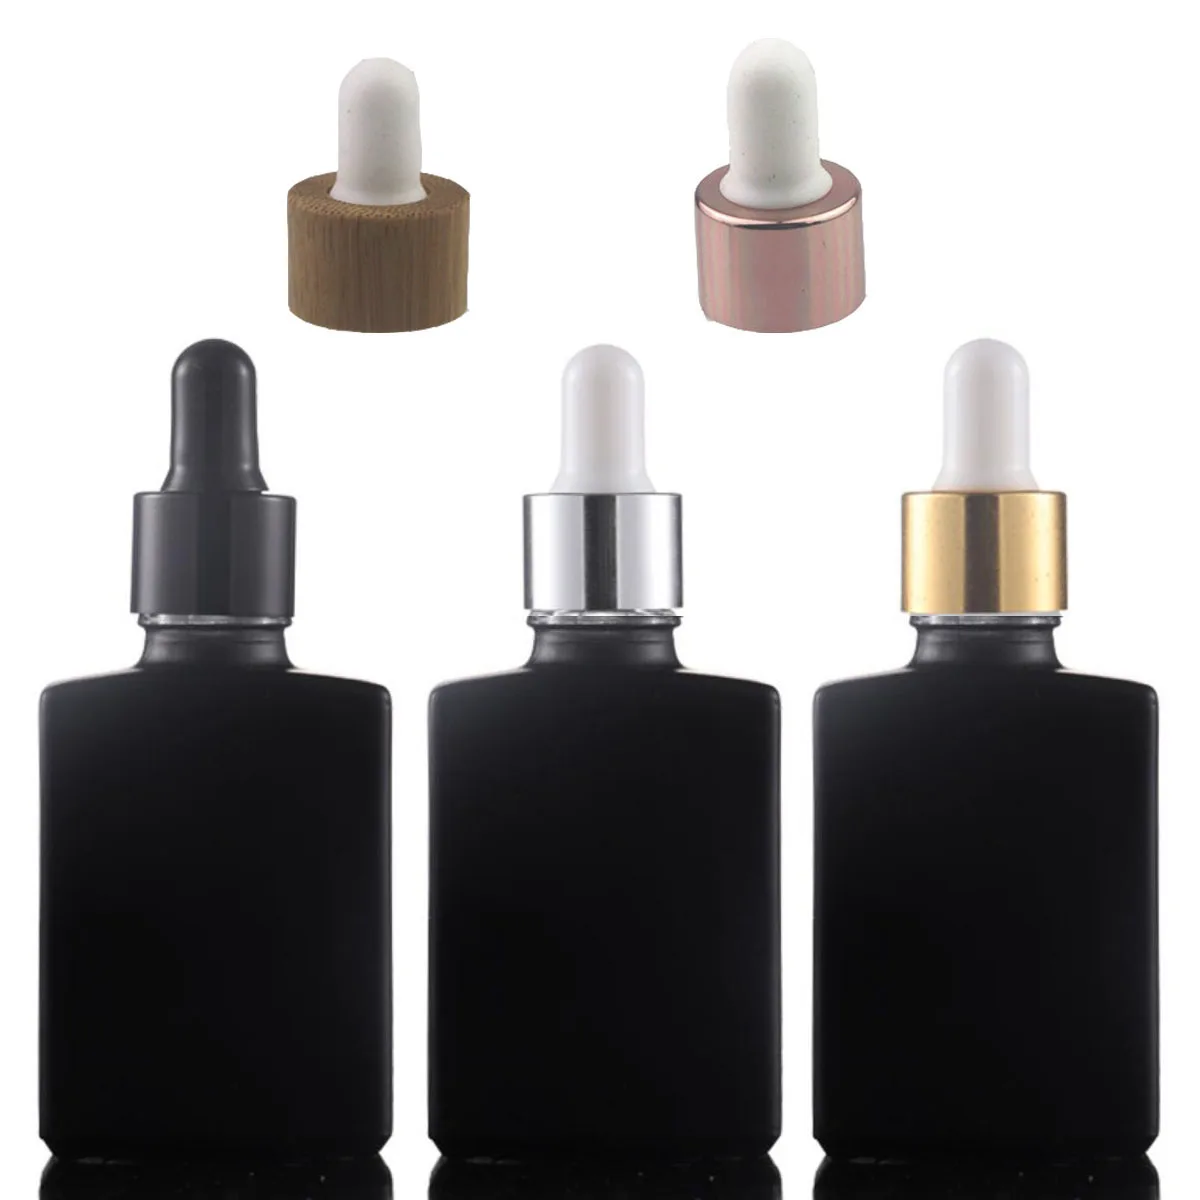 10X 15ml 30ml 50ml 100m Flat Frosted Matte Black Clear Glass Essential Oils Serum Bottle With Glass Dropper Eye dripper Pipette